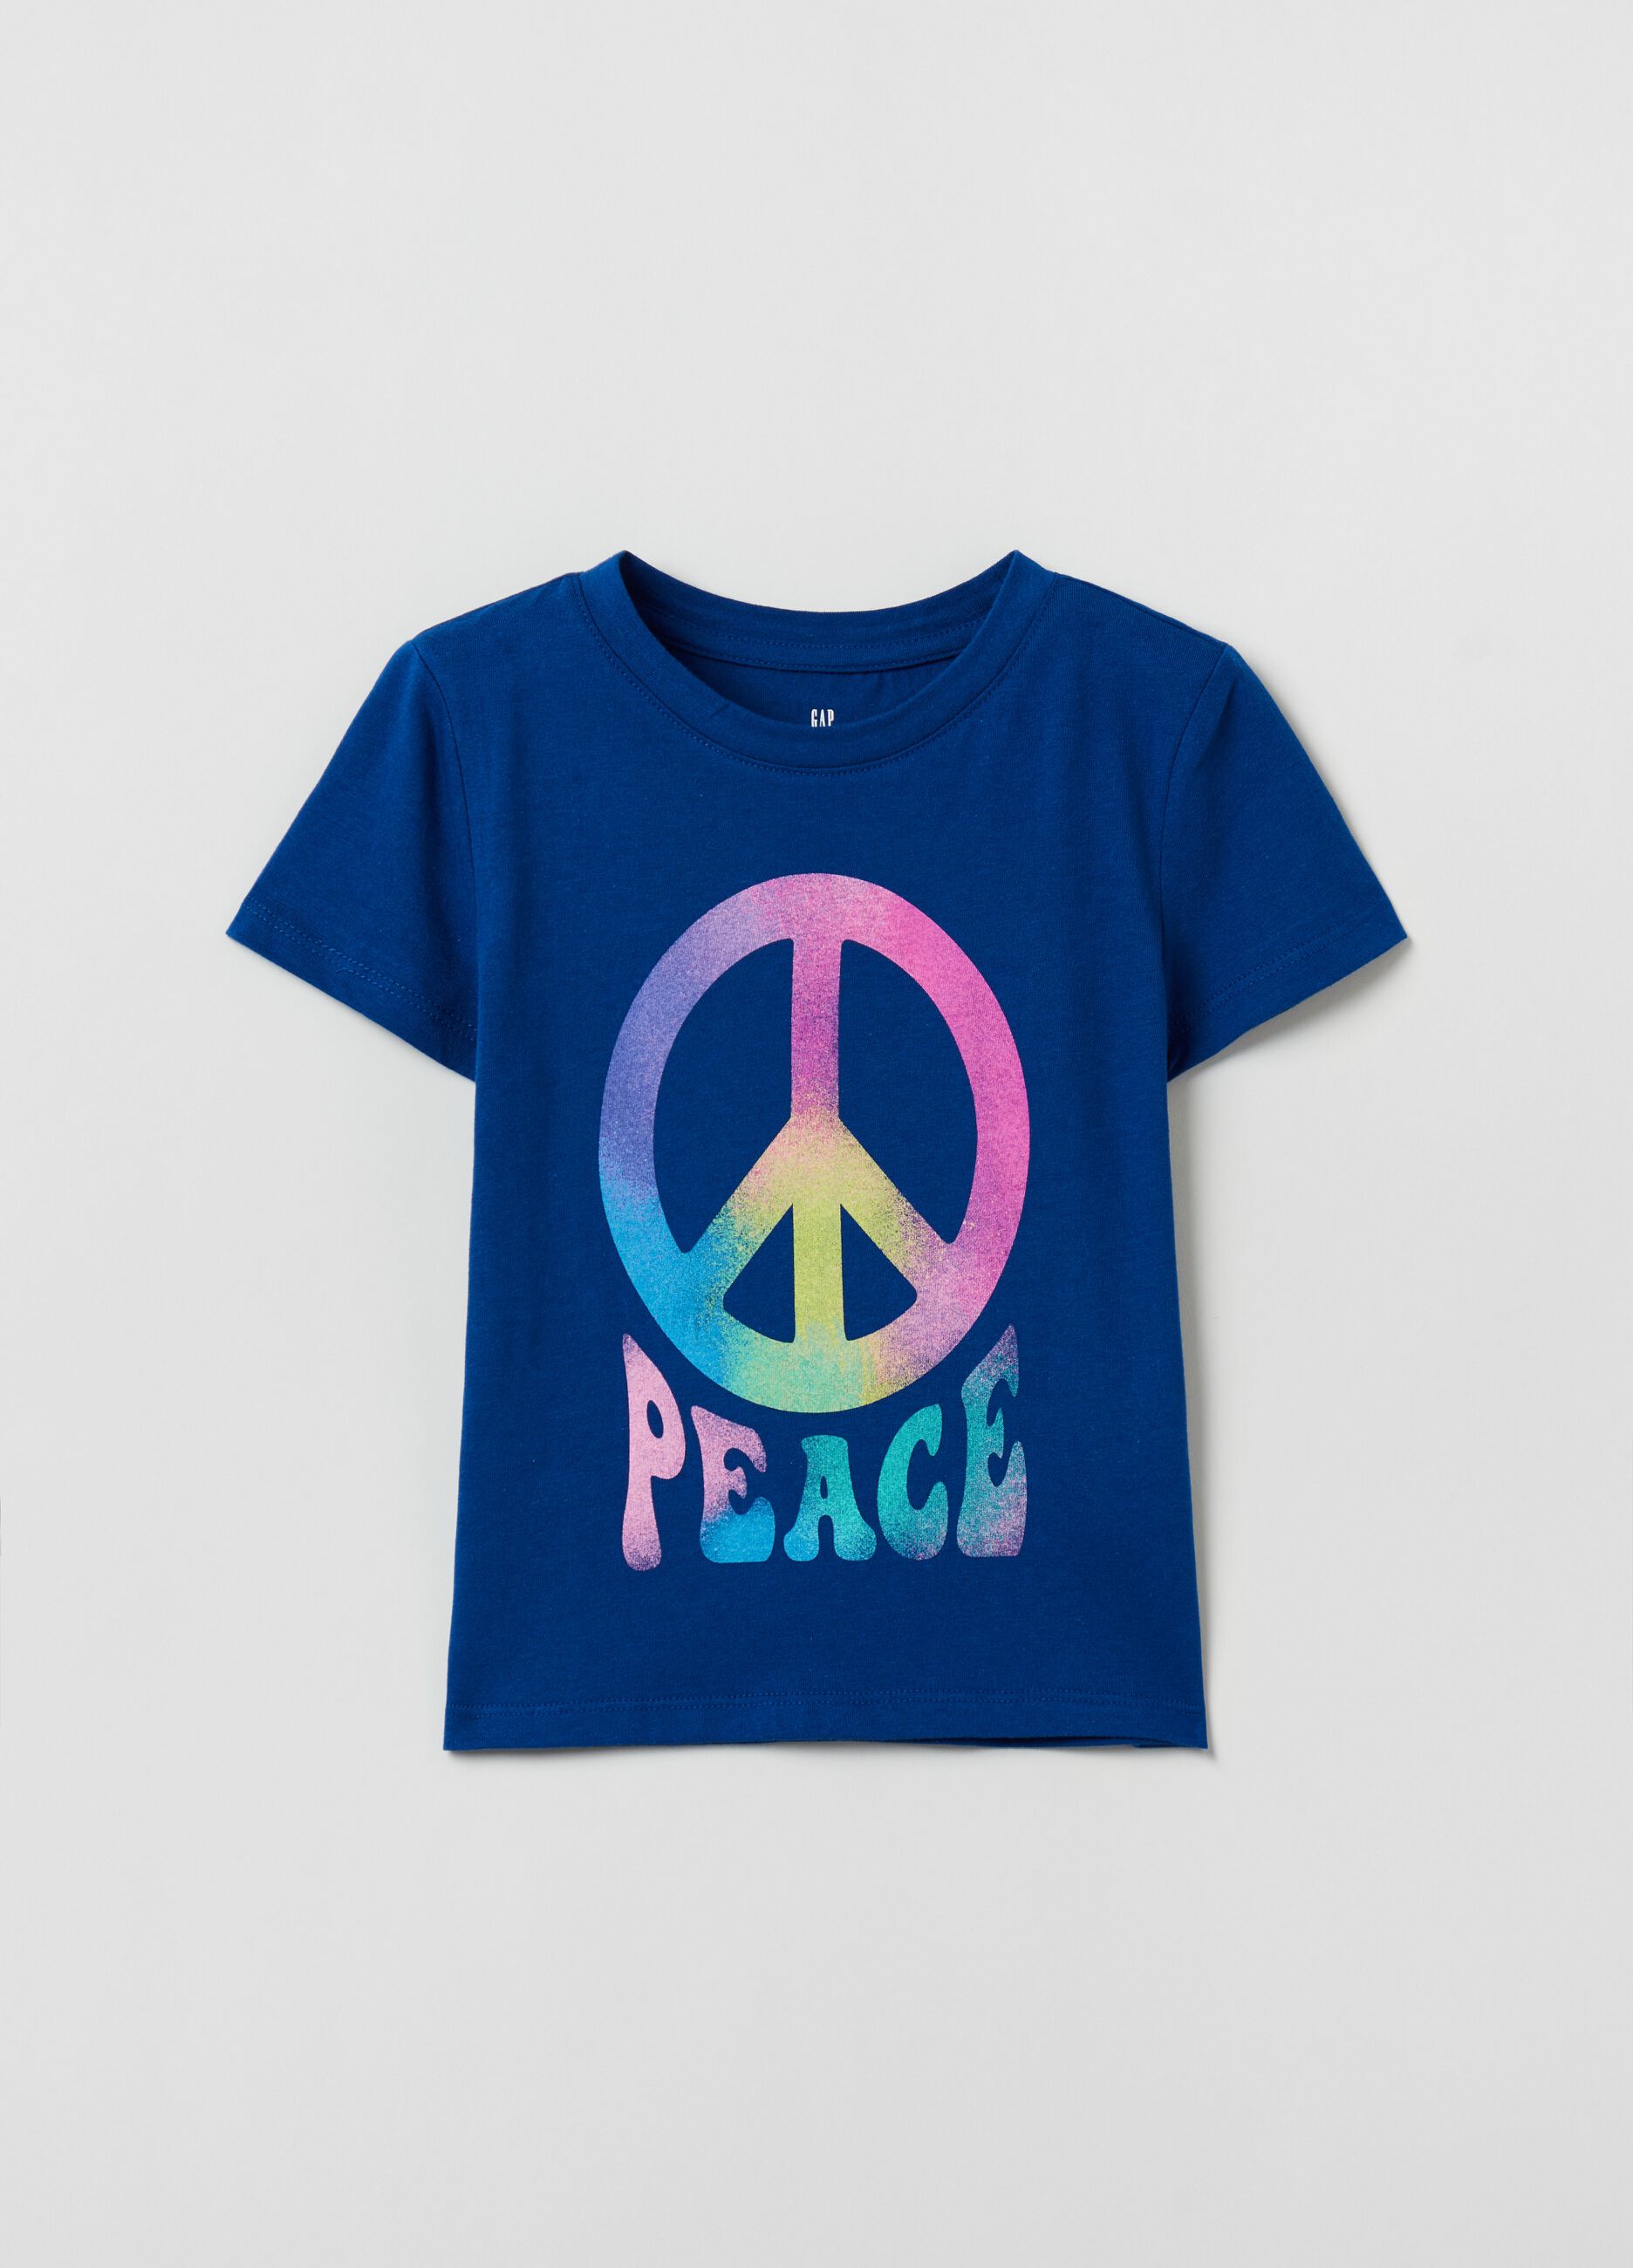 Cotton T-shirt with peace print